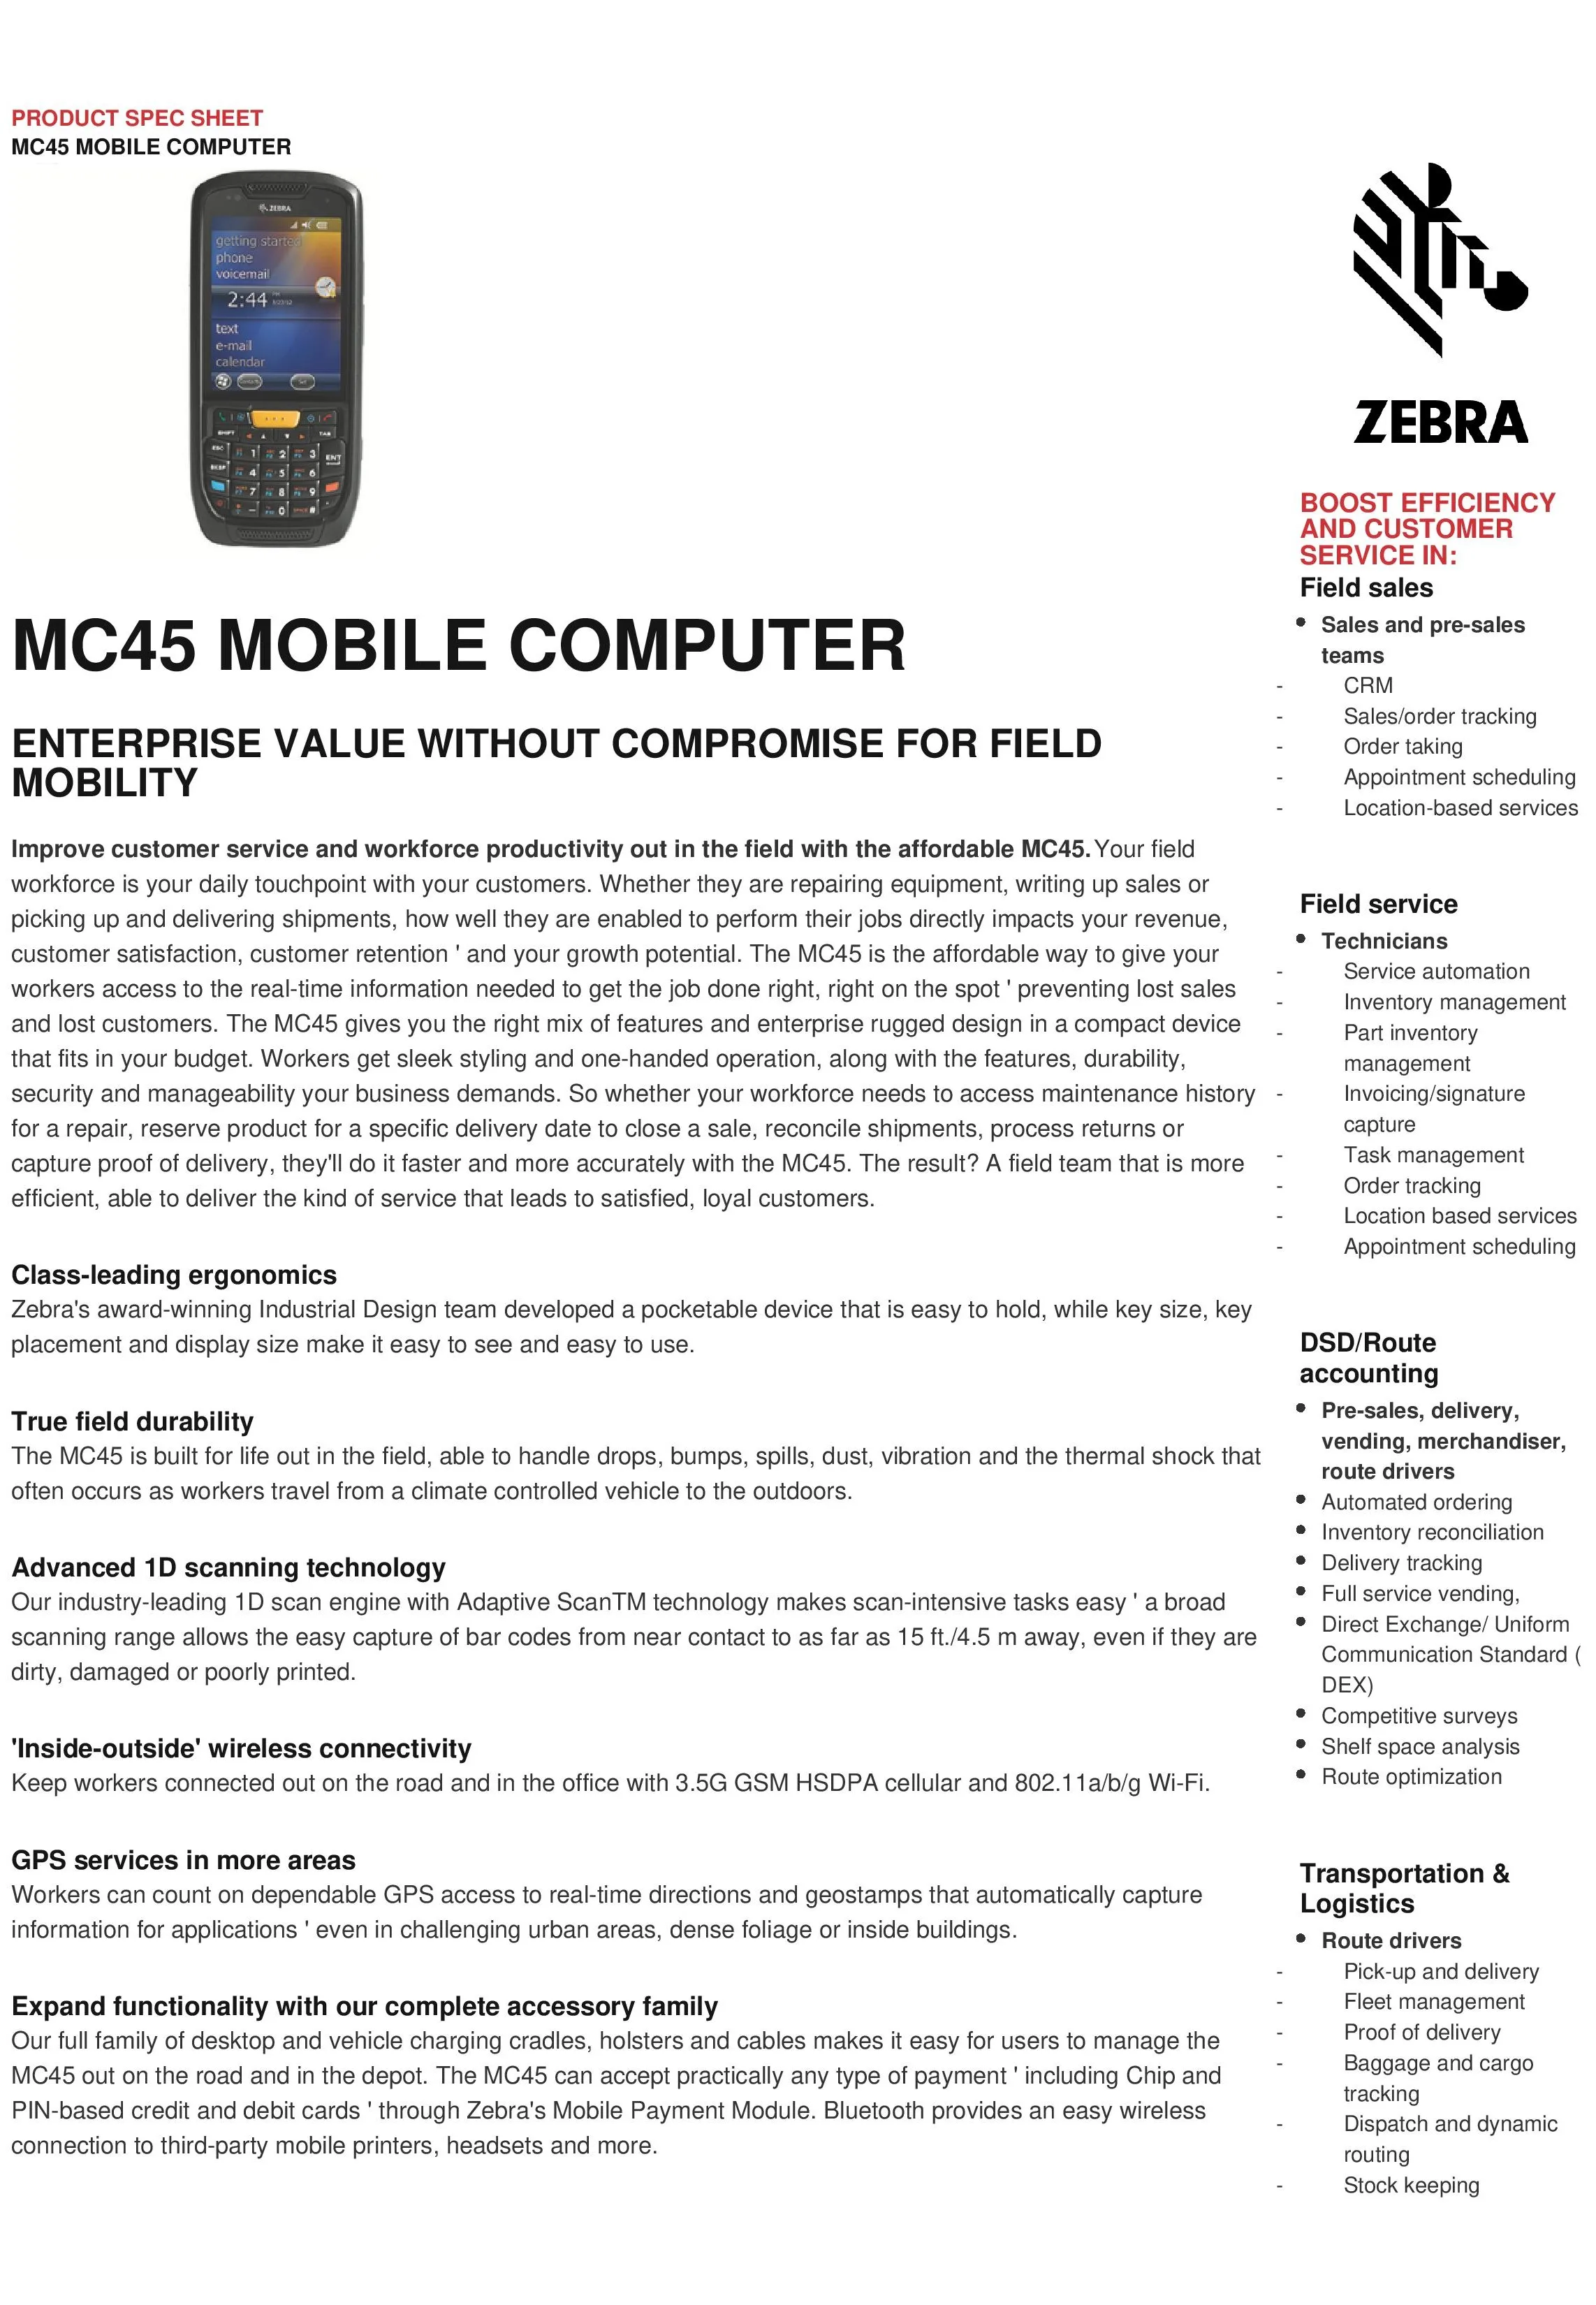 MC45 MOBILE COMPUTER - ENTERPRISE VALUE WITHOUT COMPROMISE FOR FIELD MOBILITY